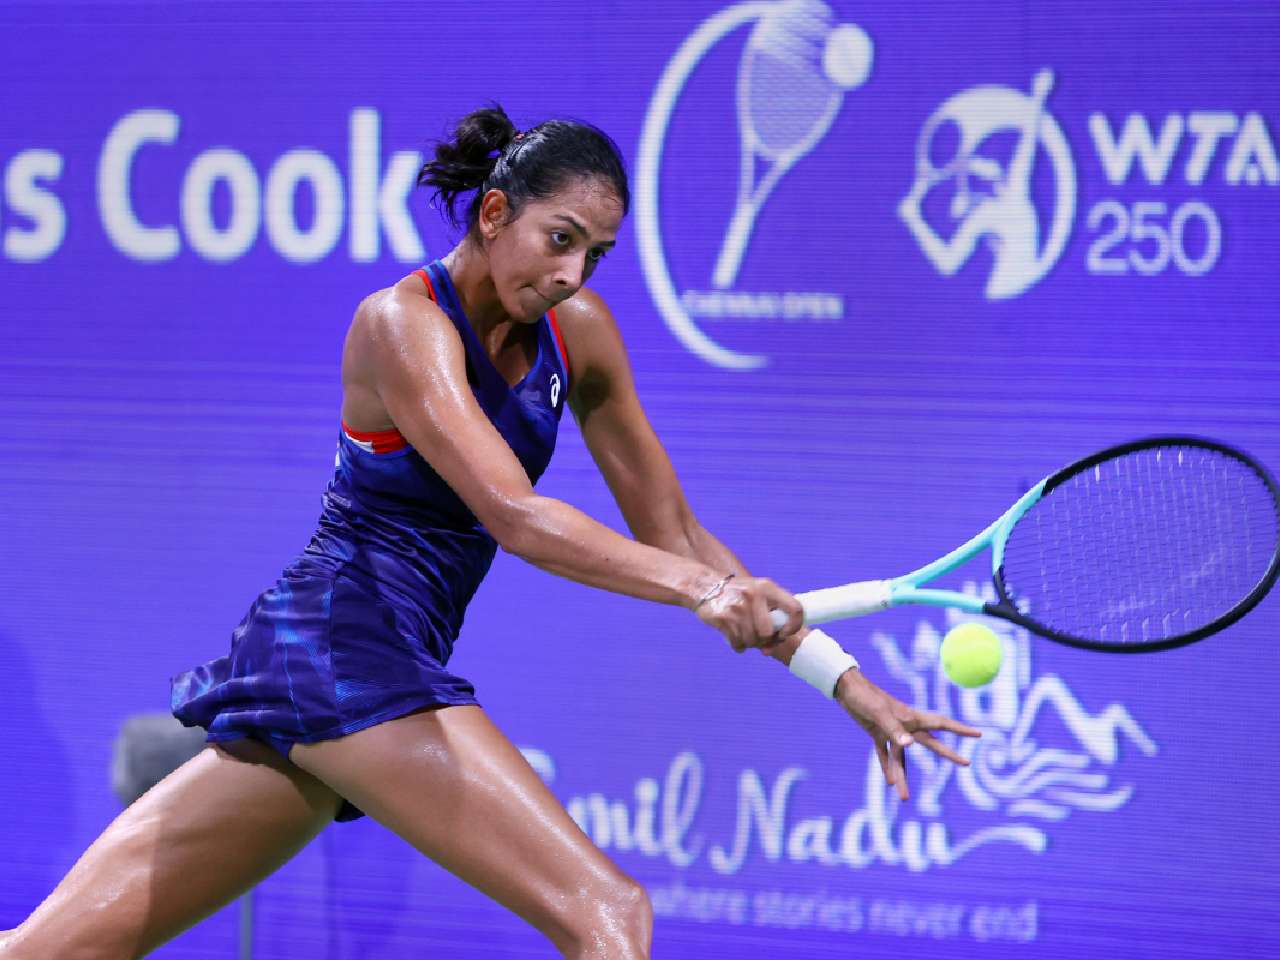 Chennai Open Day3 LIVE: India's Karman Kaur headlines second round action at Chennai Open, seeded players Rebecca Peterson, Rebecca Marino & Wang Qiang eye spot in quarterfinals  - Follow Chennai Open LIVE updates